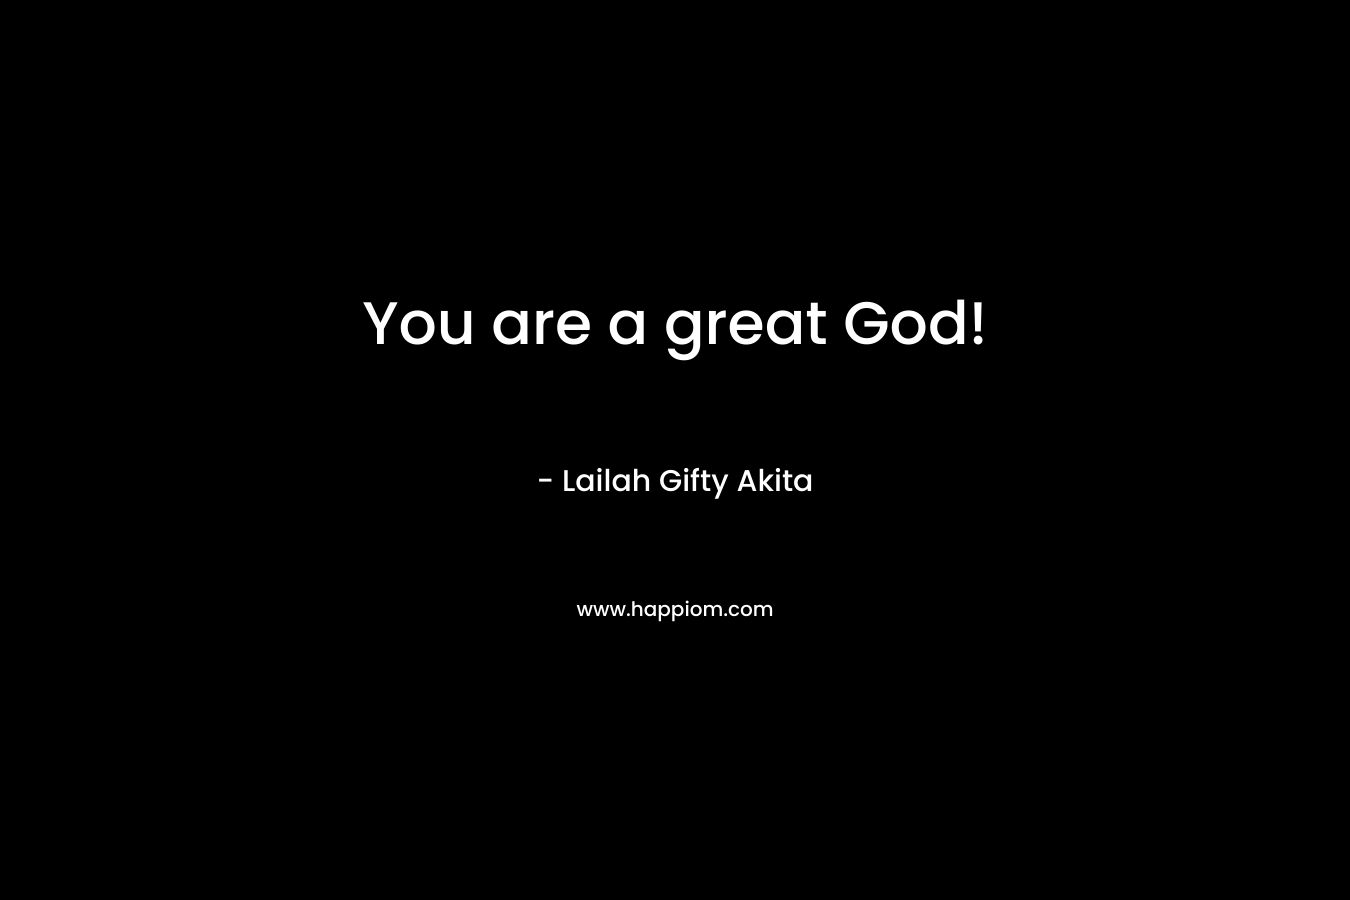 You are a great God!